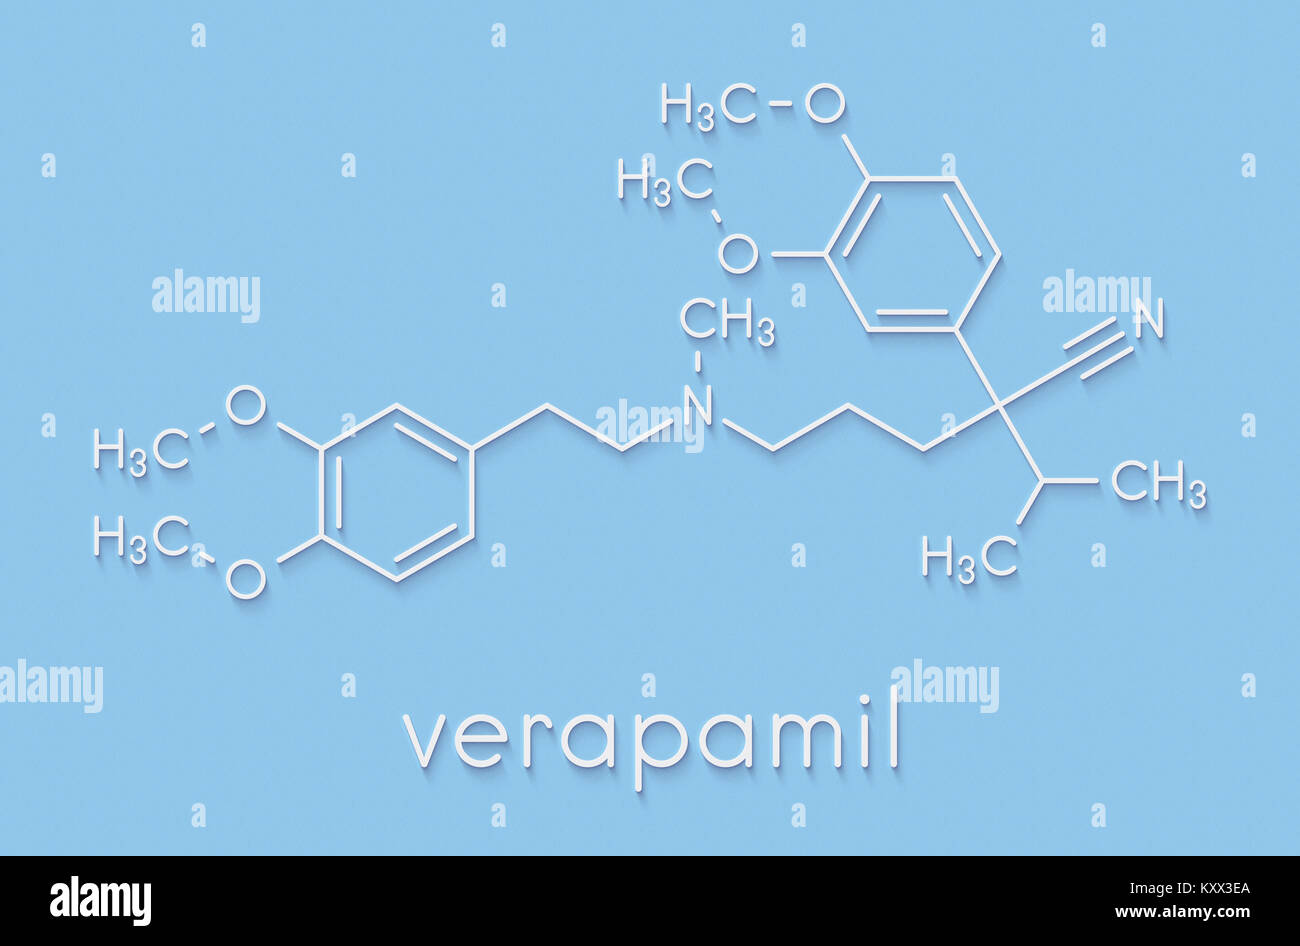 Verapamil calcium channel blocker drug. Mainly used in treatment of hypertension (high blood pressure) and cardiac arrhythmia (irregular heartbeat). S Stock Photo